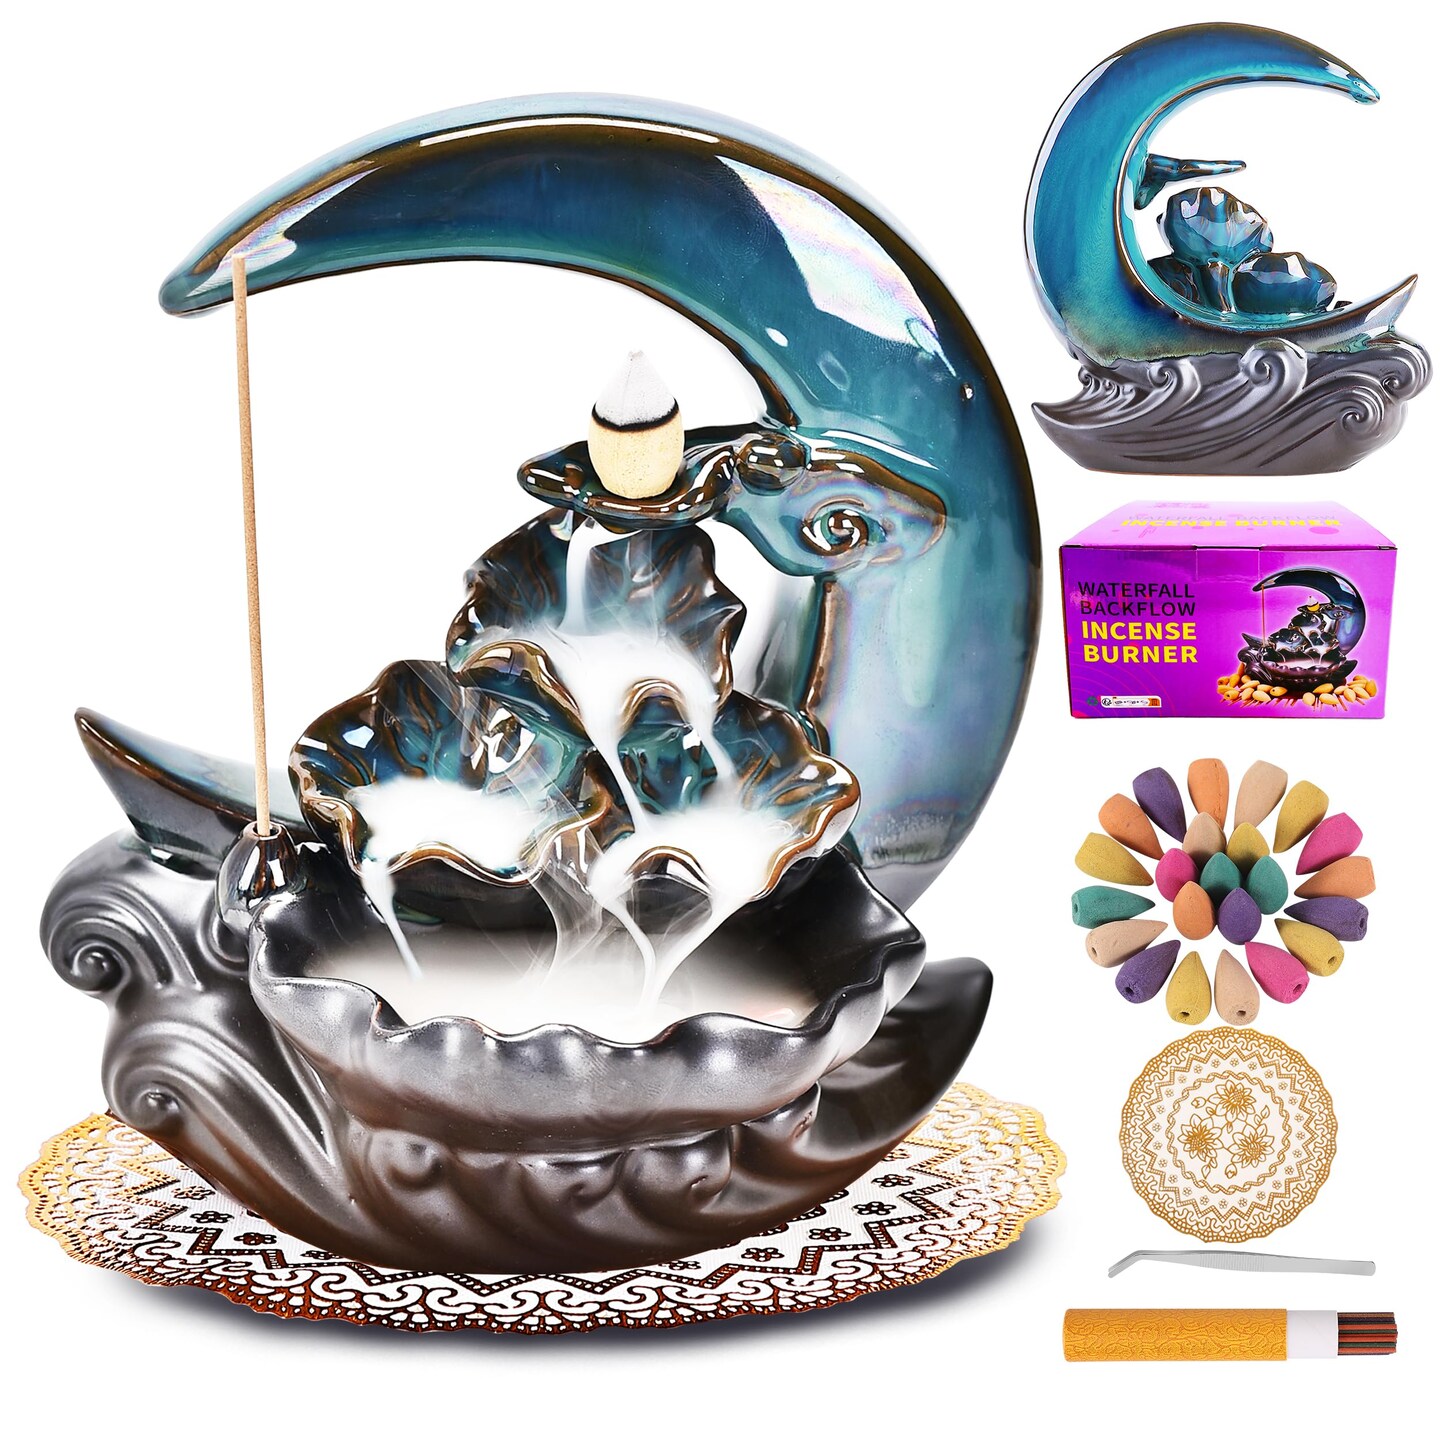 Zvaiuk New Moon Backflow Incense Holder, Ceramic Hand-Made Incense Fountain Burner with 100 Backflow Incense Cones&#xFF0C;Fragrance Incense Stick&#xFF0C;mat&#xFF0C;Aromatherapy Home Decoration